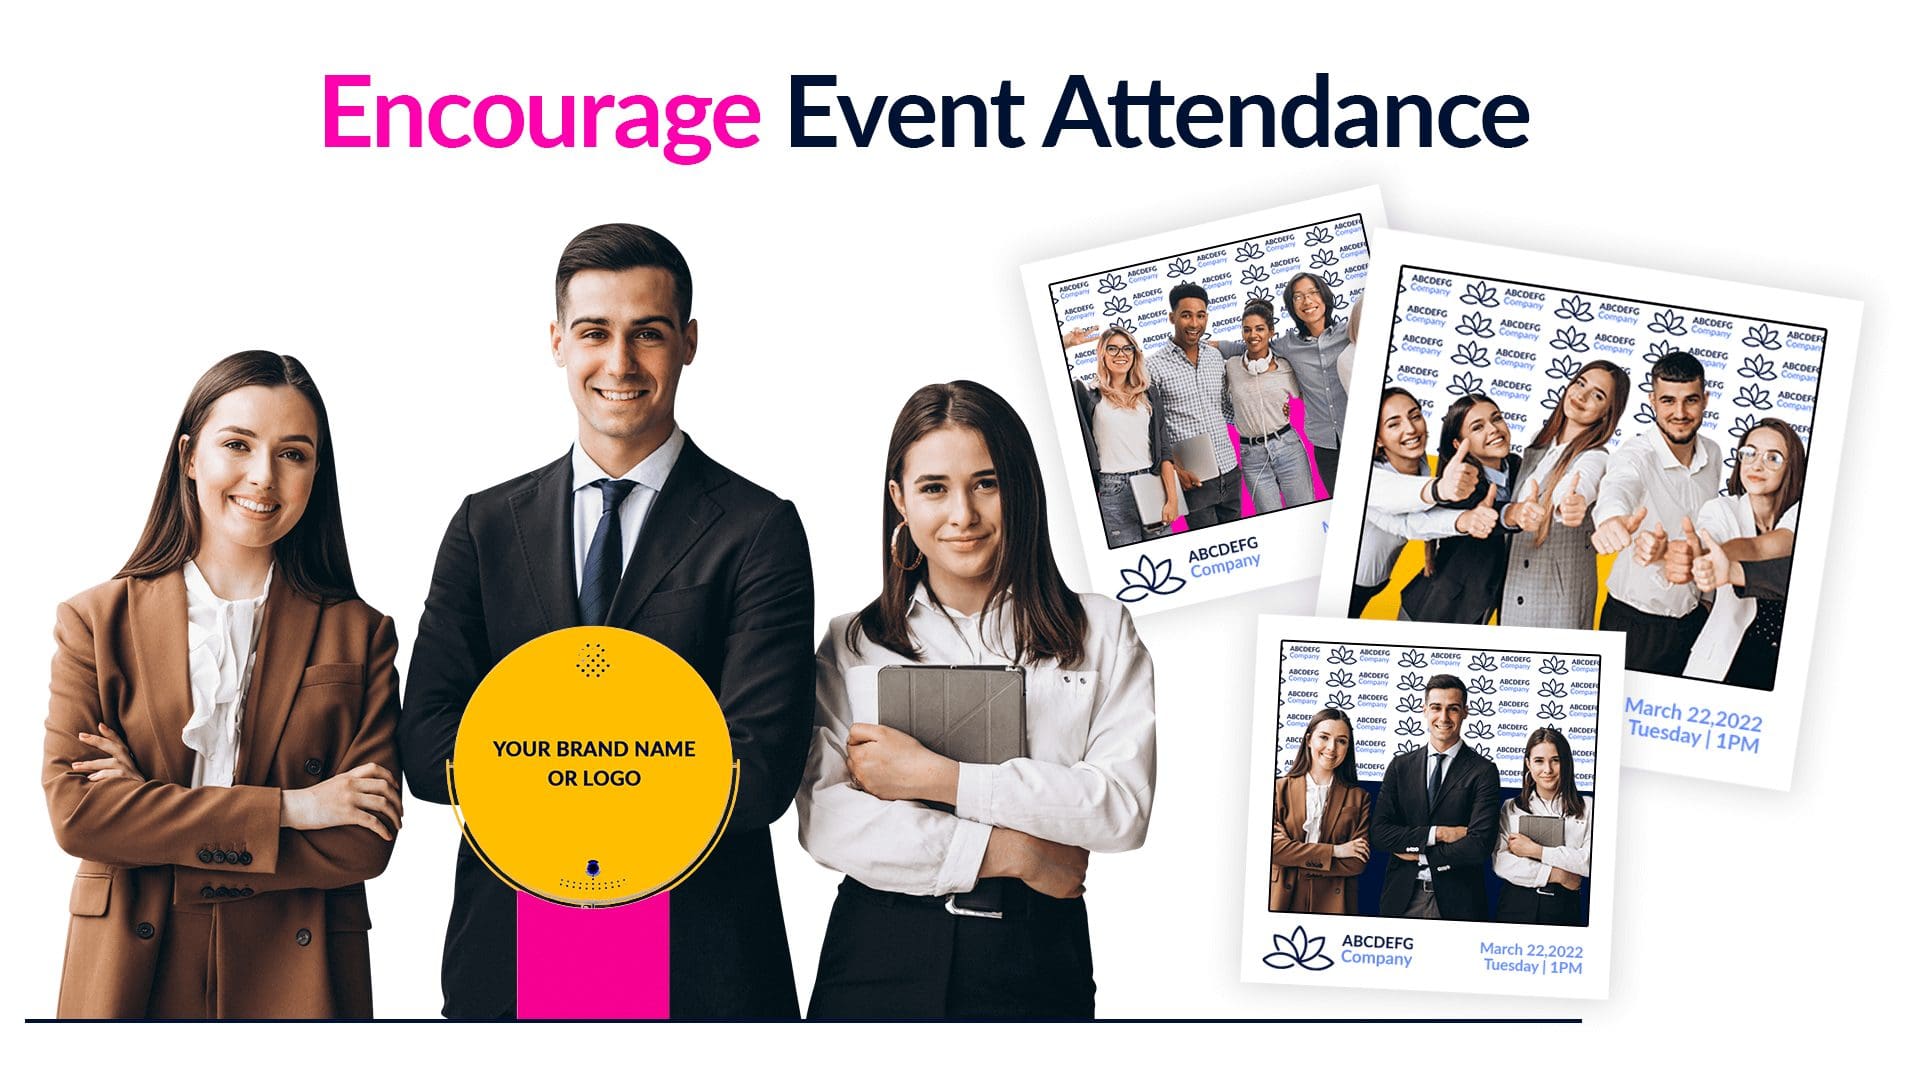 Encourage event attendance with photo booths